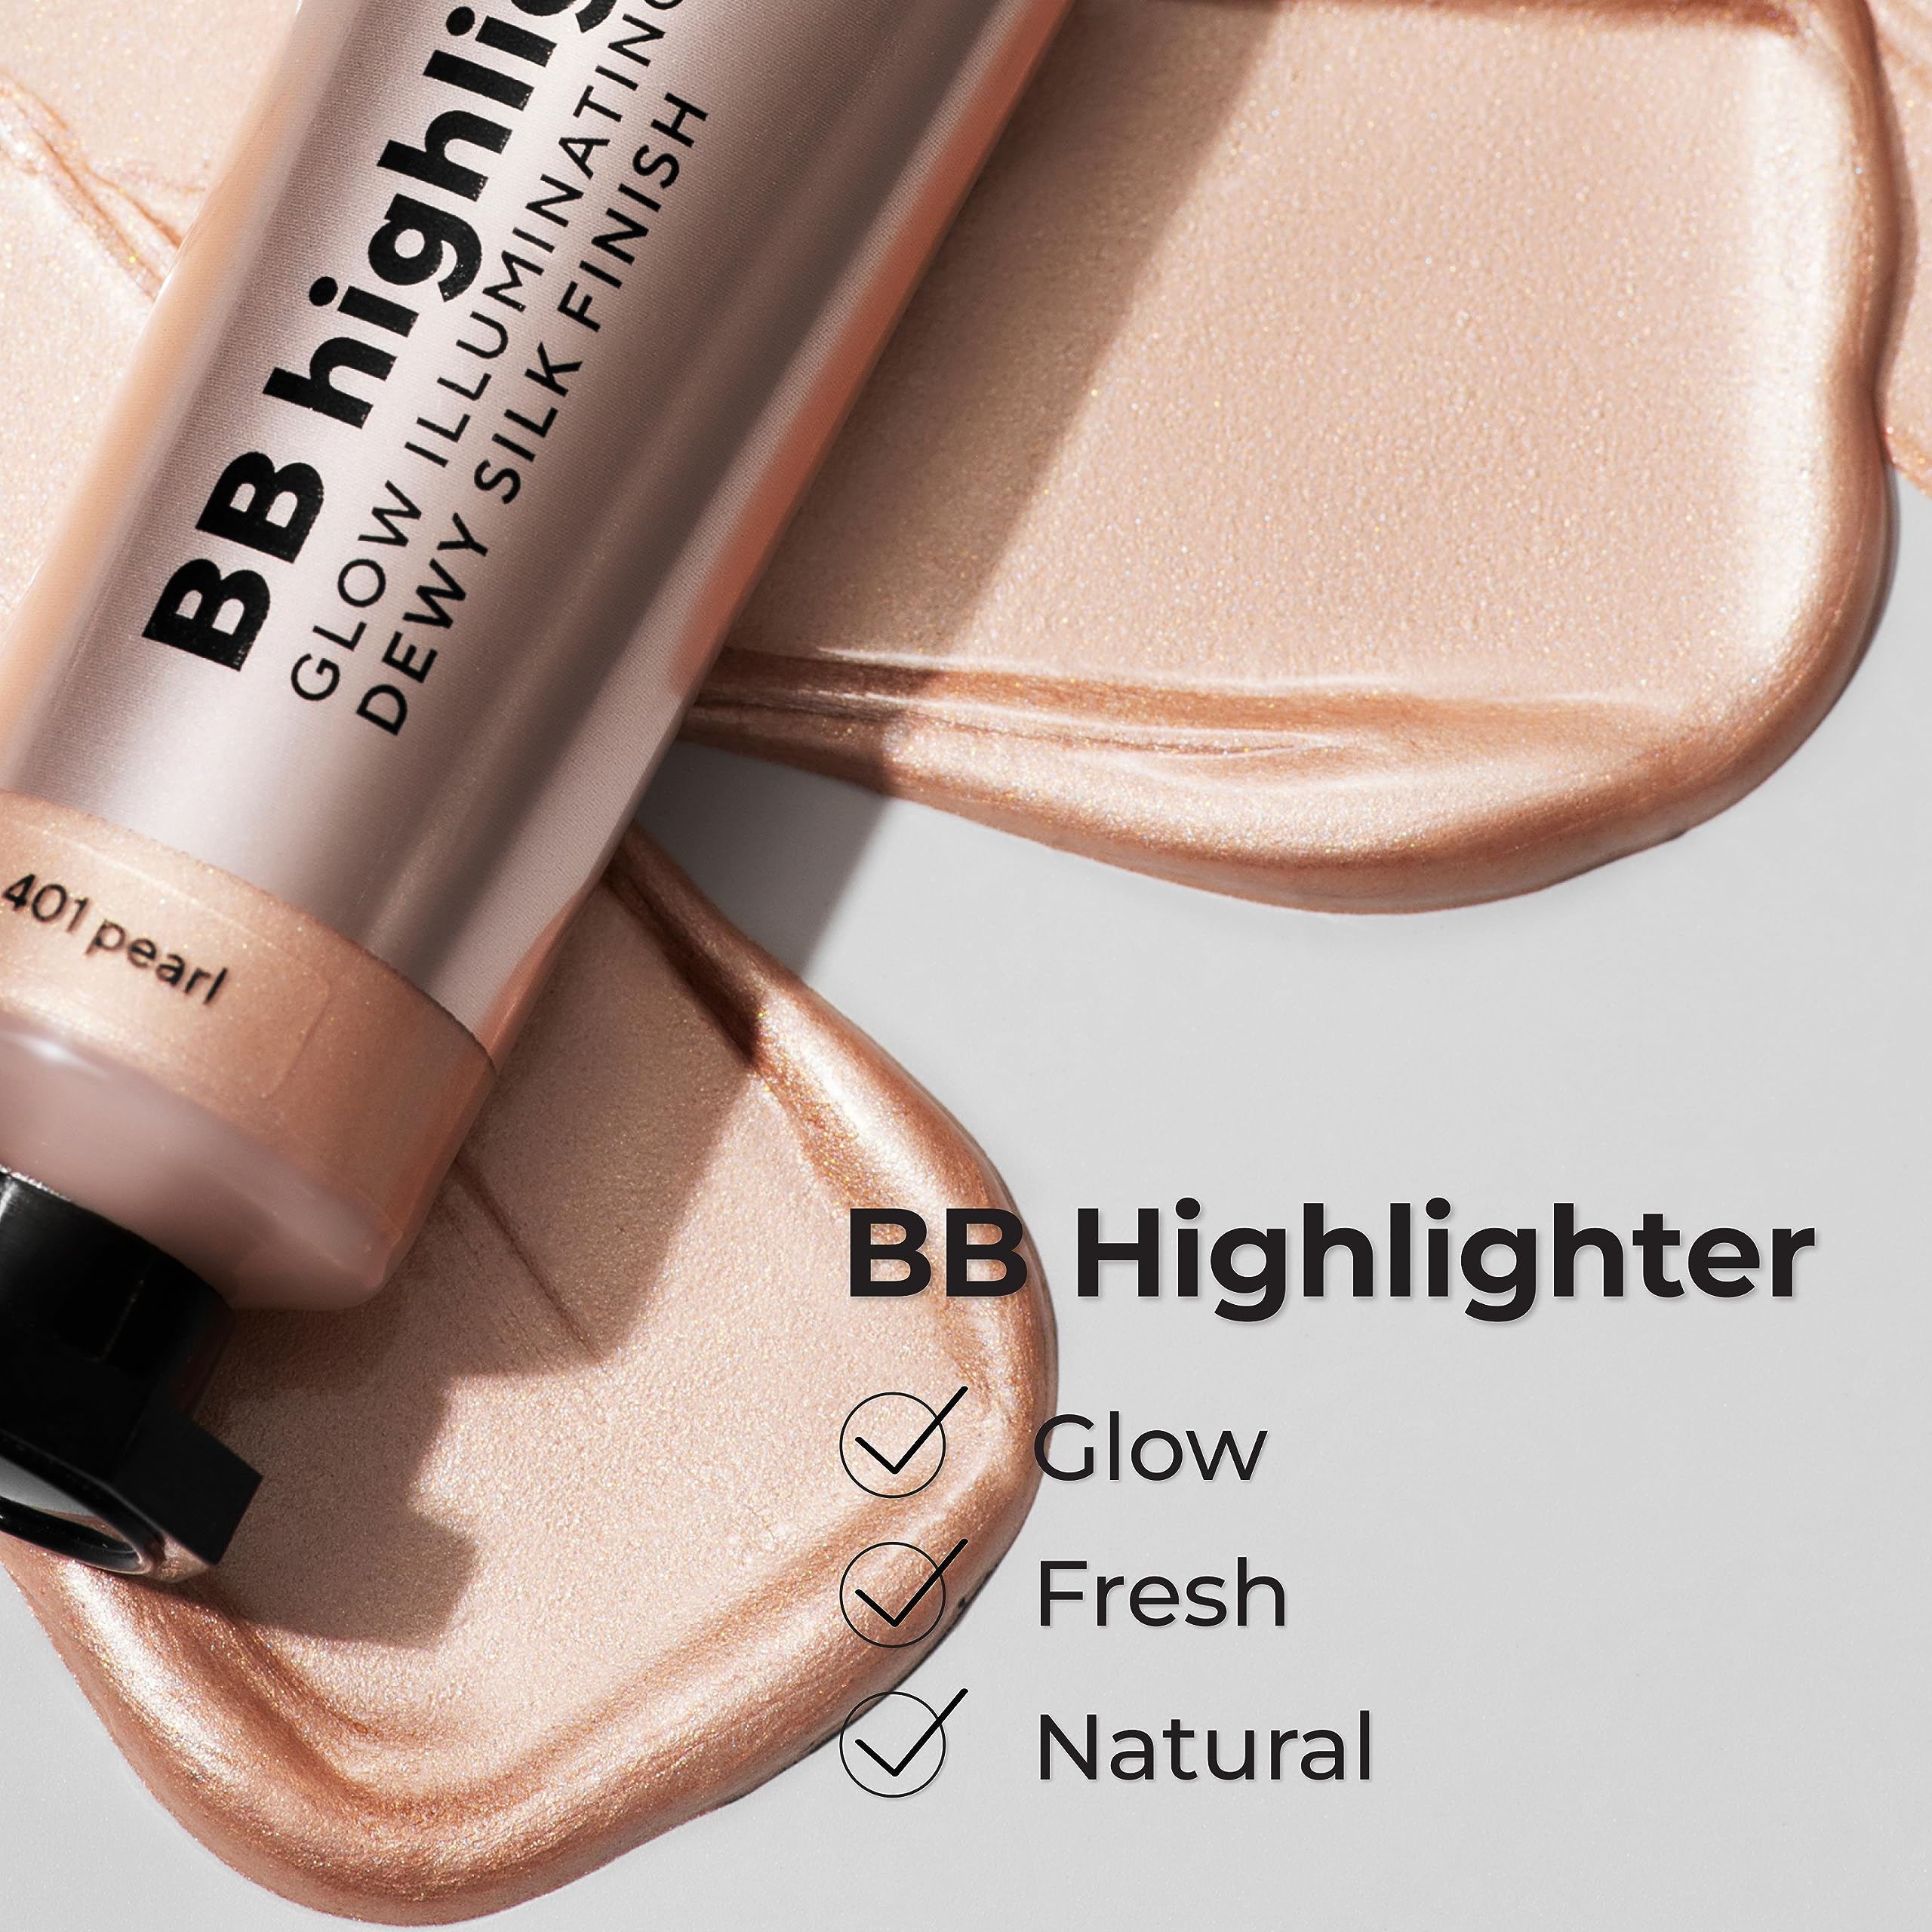 Lamel Dewy Cream BB Highlighter - Lightweight, Buildable and Luxuriously Glossy with Radiant, Natural-looking, Non-Greasy, Moisturizing, and Long-Lasting Formula for Flawless, Skin-Brightening - 401